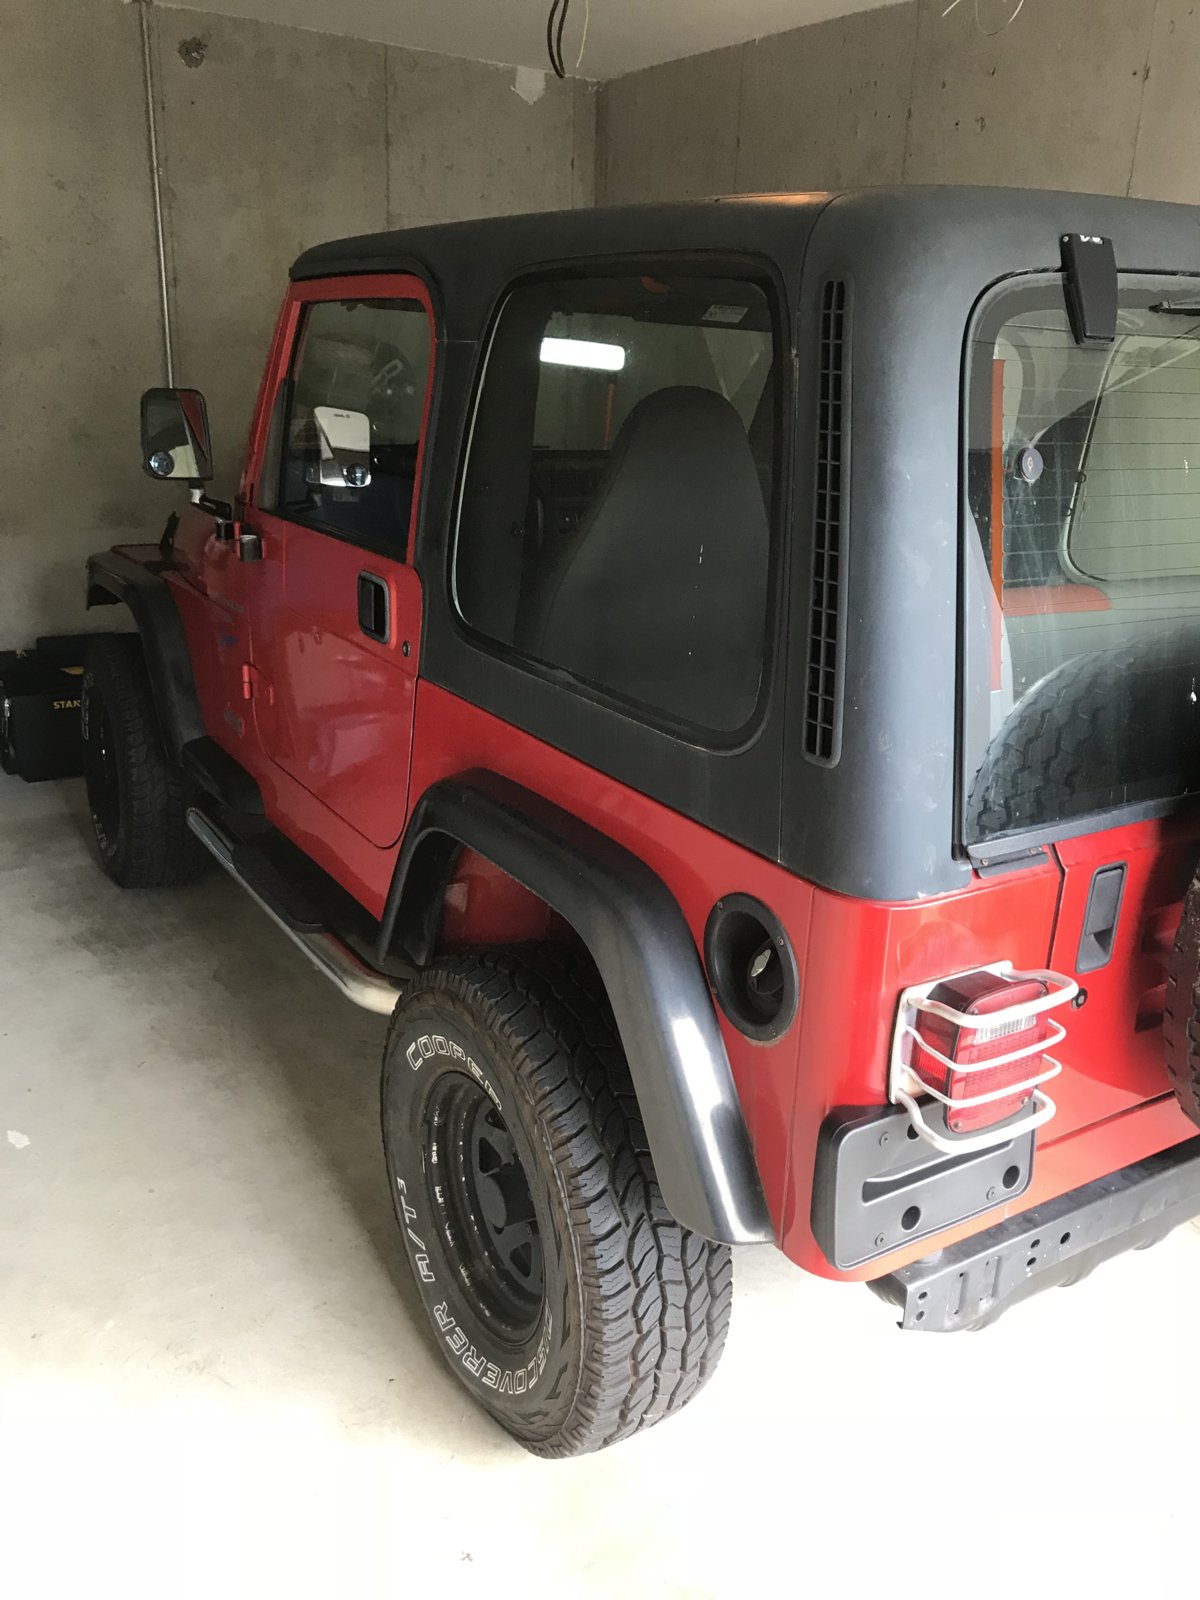 TJ stock height from the factory? | Jeep Wrangler TJ Forum